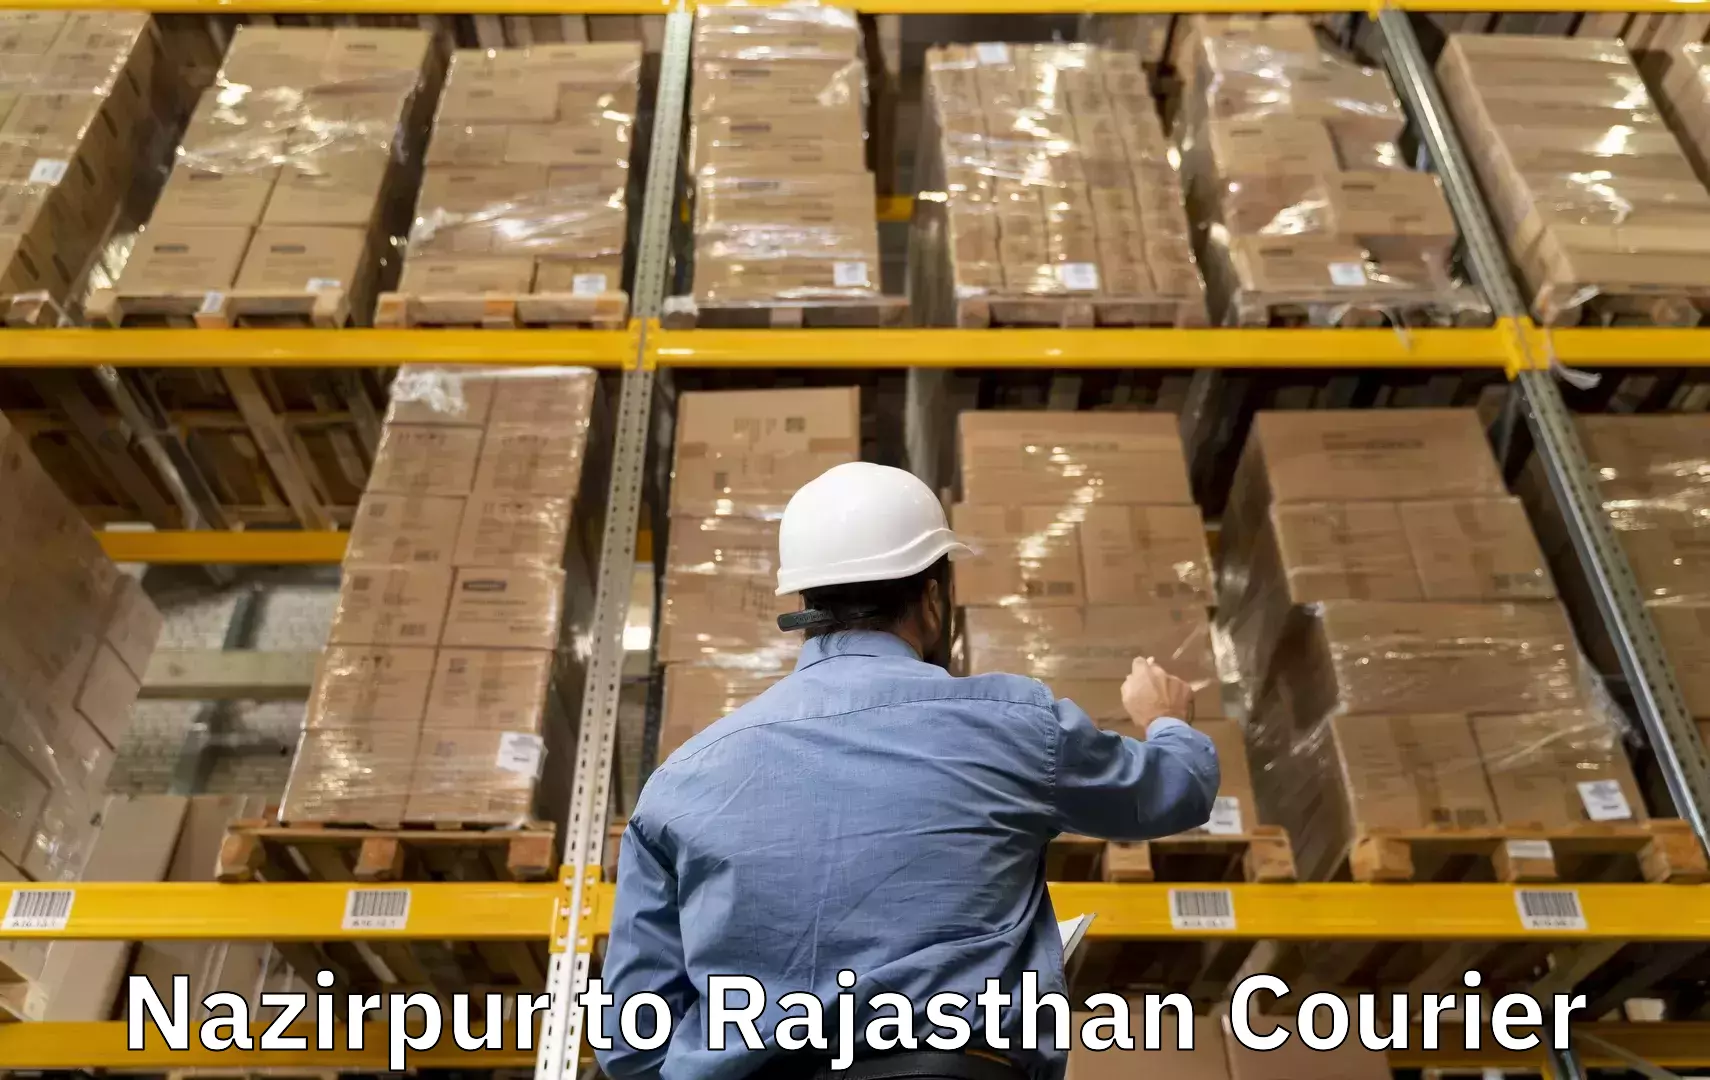 Personal effects shipping Nazirpur to Mathania